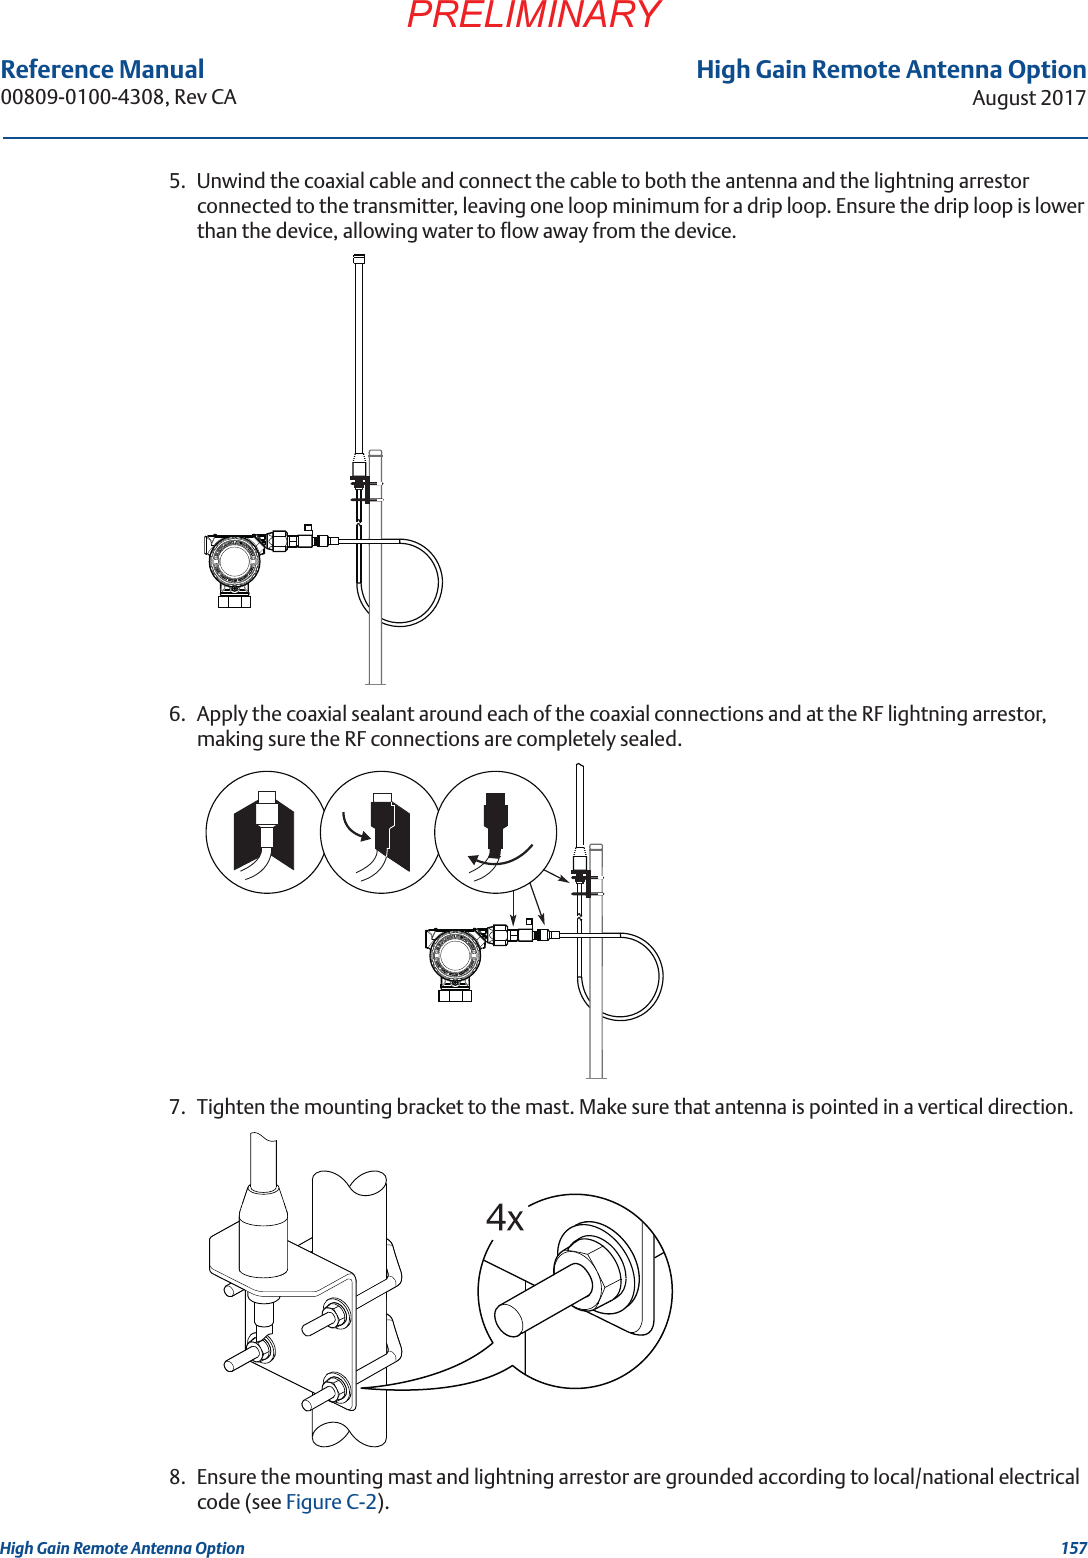 157High Gain Remote Antenna OptionAugust 2017High Gain Remote Antenna OptionPRELIMINARYReference Manual 00809-0100-4308, Rev CA5. Unwind the coaxial cable and connect the cable to both the antenna and the lightning arrestor connected to the transmitter, leaving one loop minimum for a drip loop. Ensure the drip loop is lower than the device, allowing water to flow away from the device.6. Apply the coaxial sealant around each of the coaxial connections and at the RF lightning arrestor, making sure the RF connections are completely sealed.7. Tighten the mounting bracket to the mast. Make sure that antenna is pointed in a vertical direction.8. Ensure the mounting mast and lightning arrestor are grounded according to local/national electrical code (see Figure C-2).IN EXPLOSIVE ATMOSPHEREKEEP TIGHT WHEN CIRCUIT ALIVEIN EXPLOSIVE ATMOSPHEREKEEP TIGHT WHEN CIRCUIT ALIVE